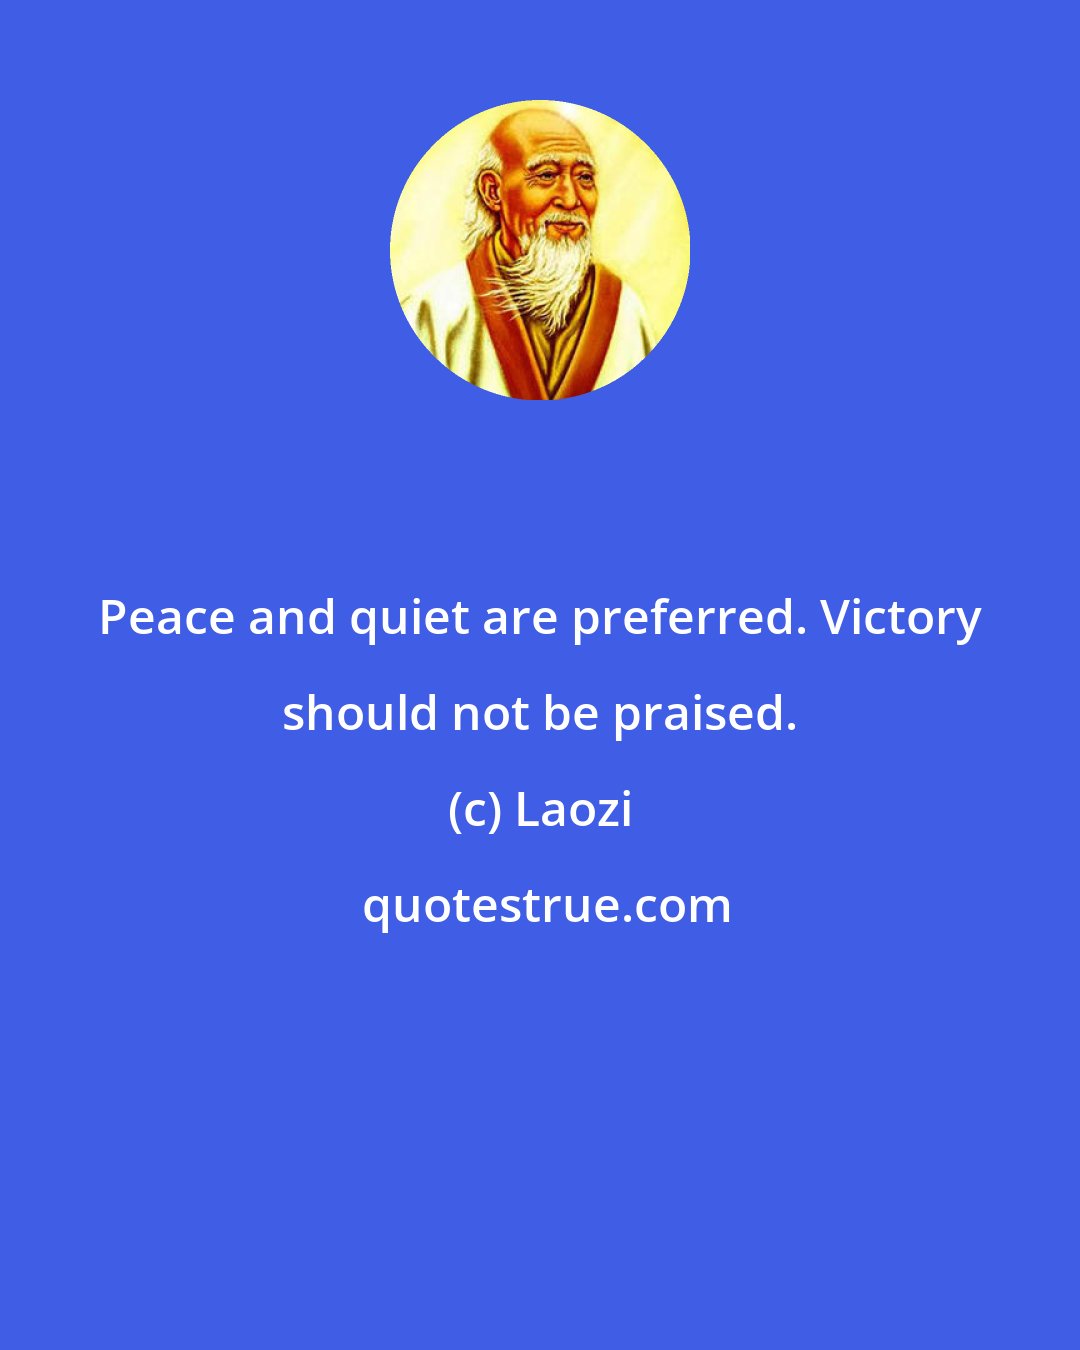 Laozi: Peace and quiet are preferred. Victory should not be praised.